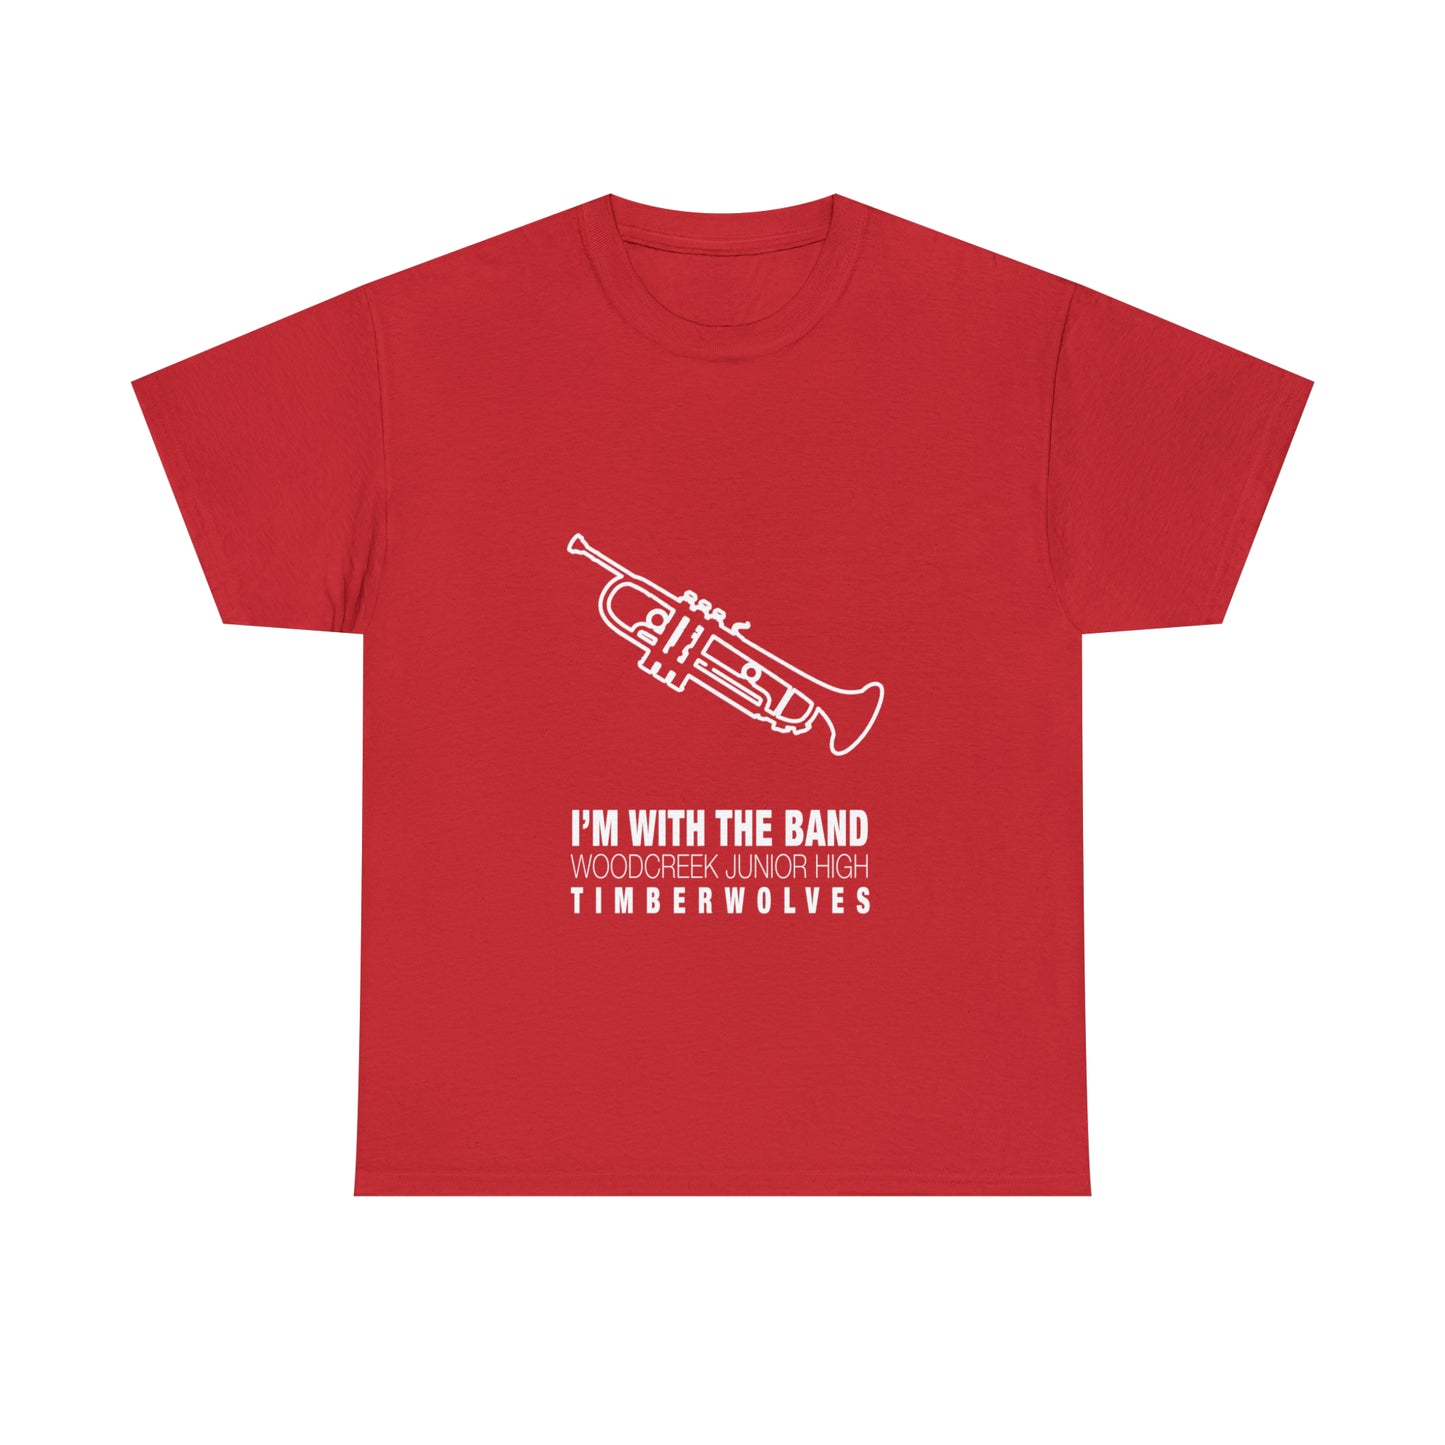 WCJH - I'M WITH THE BAND Adult Trumpet Tee (13 color options)